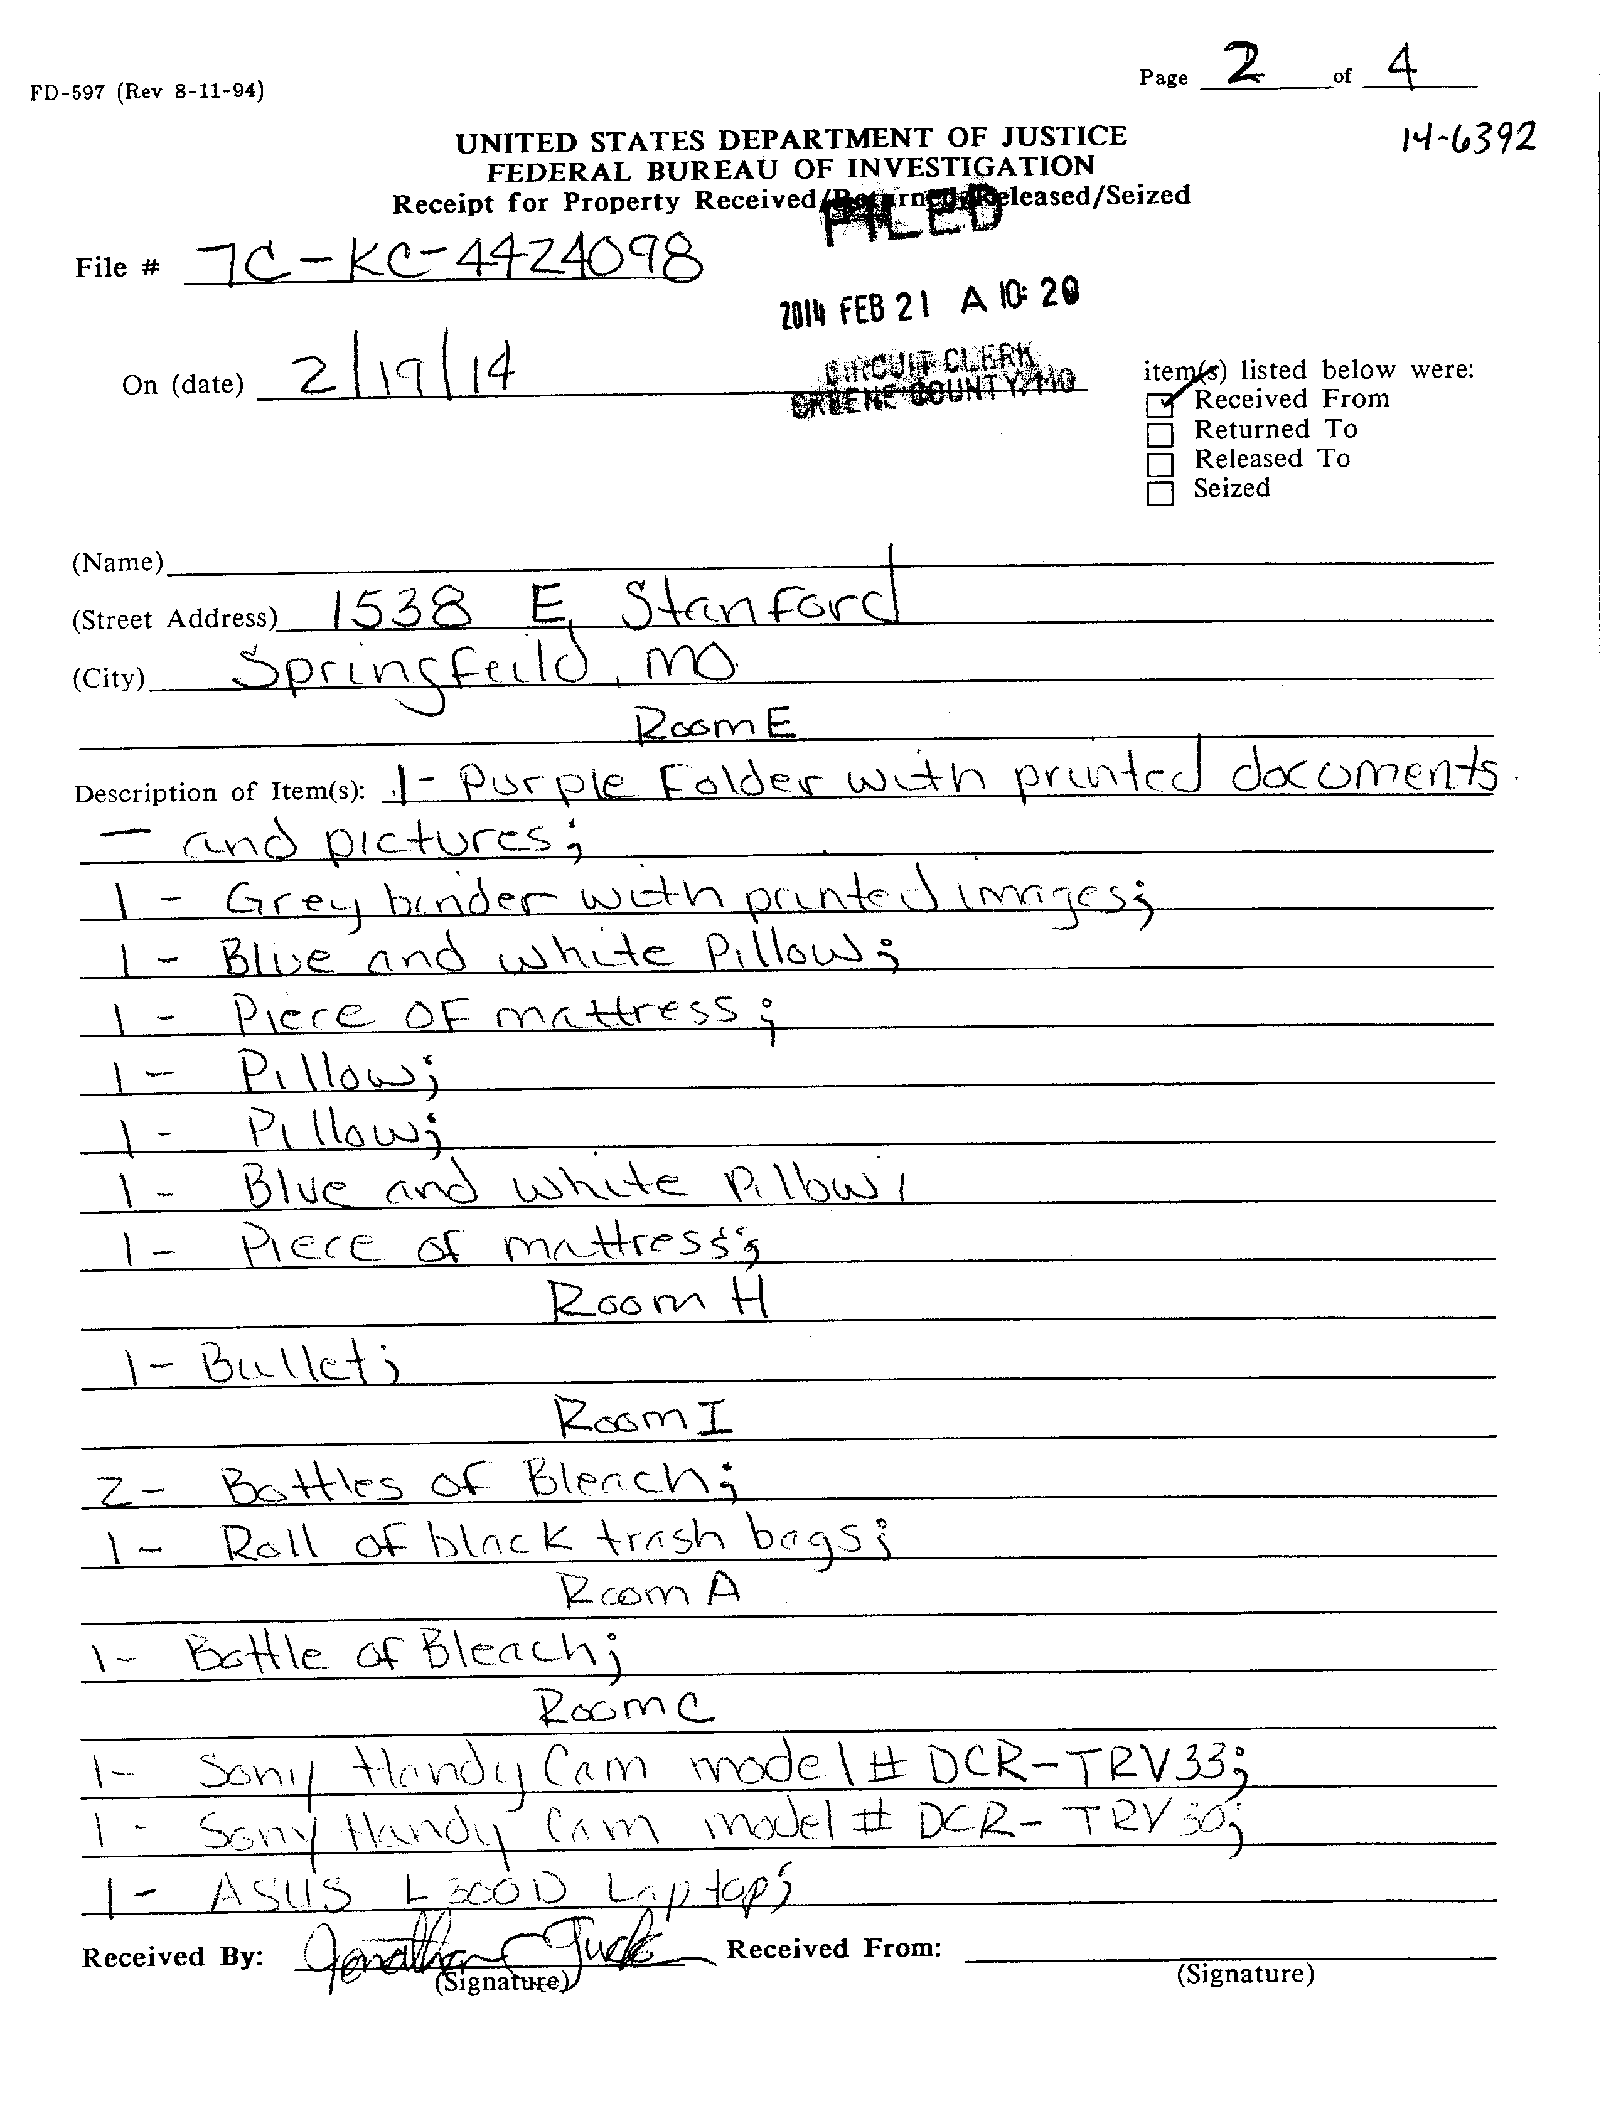 Copy of Search Warrant Return03.png